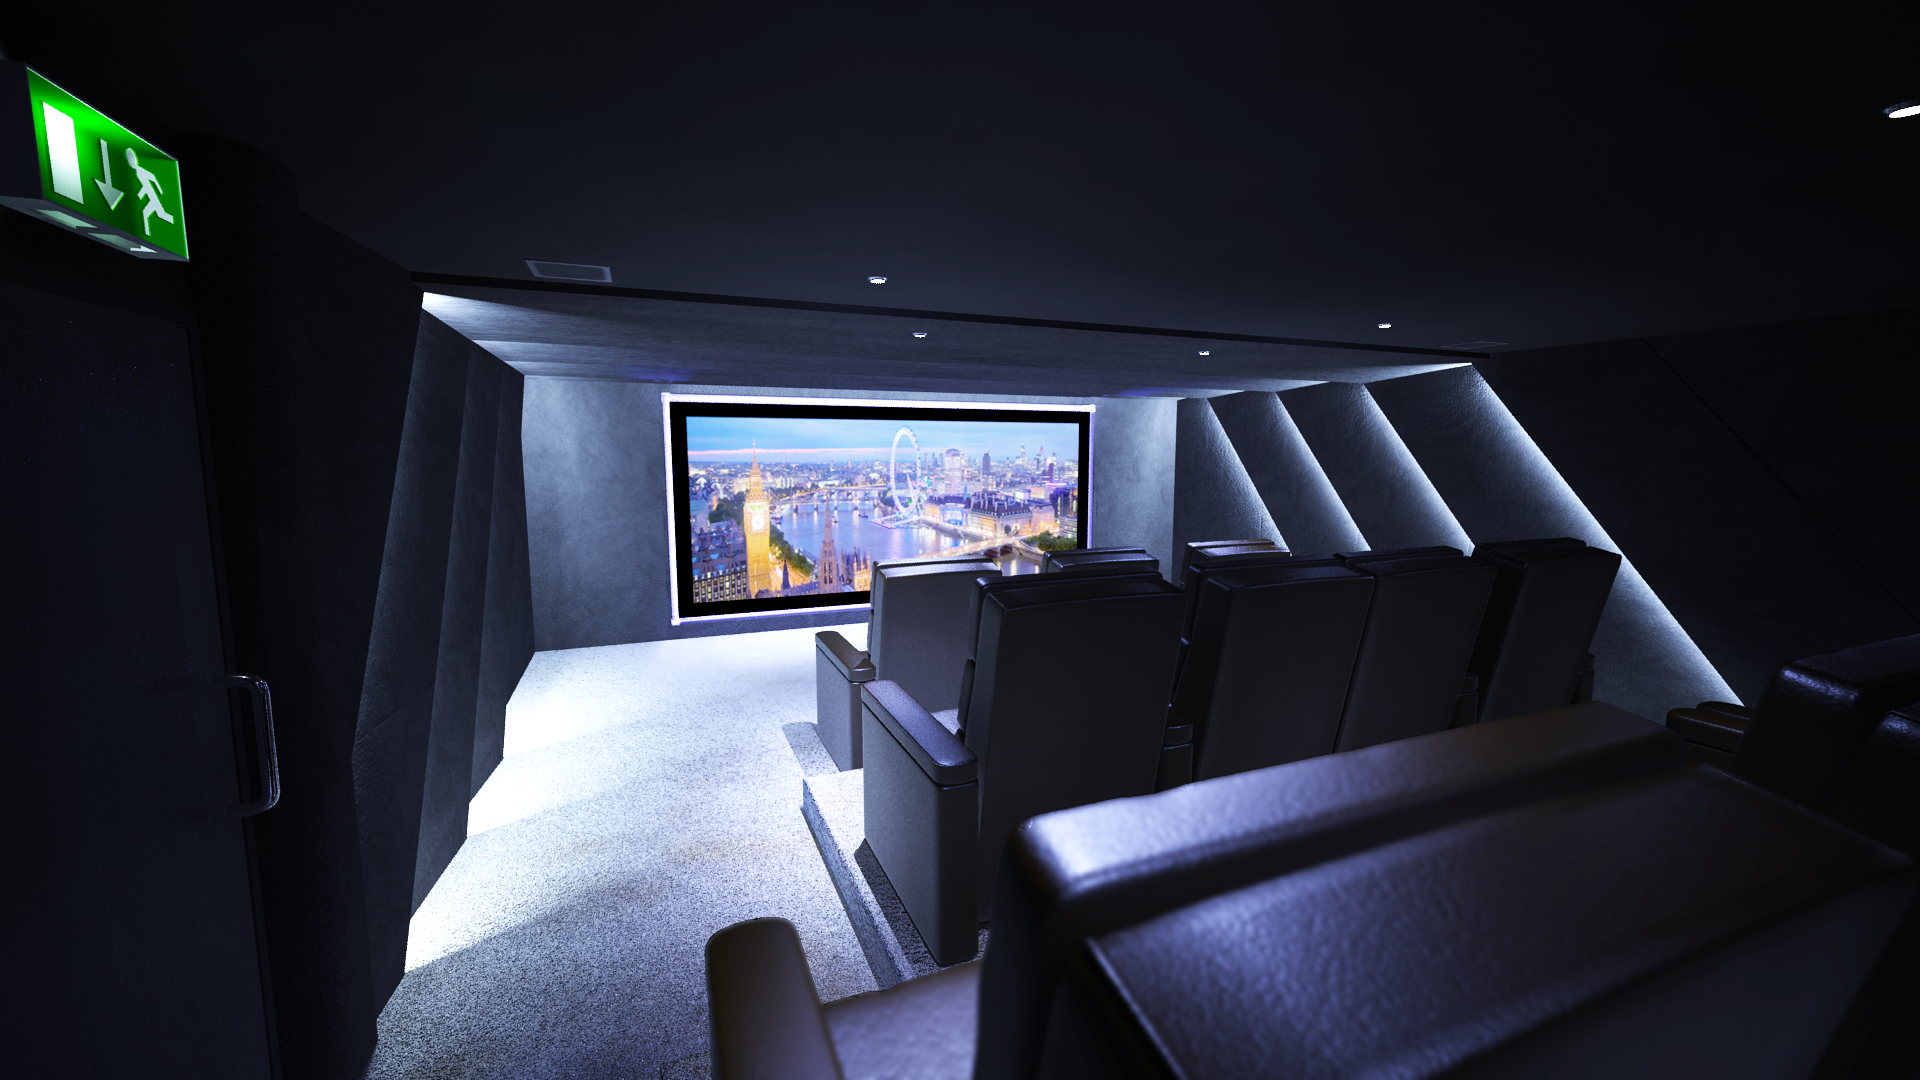 View from the rear left of the residents cinema towards the screen. Also shows home cinema seats and home cinema lighting.